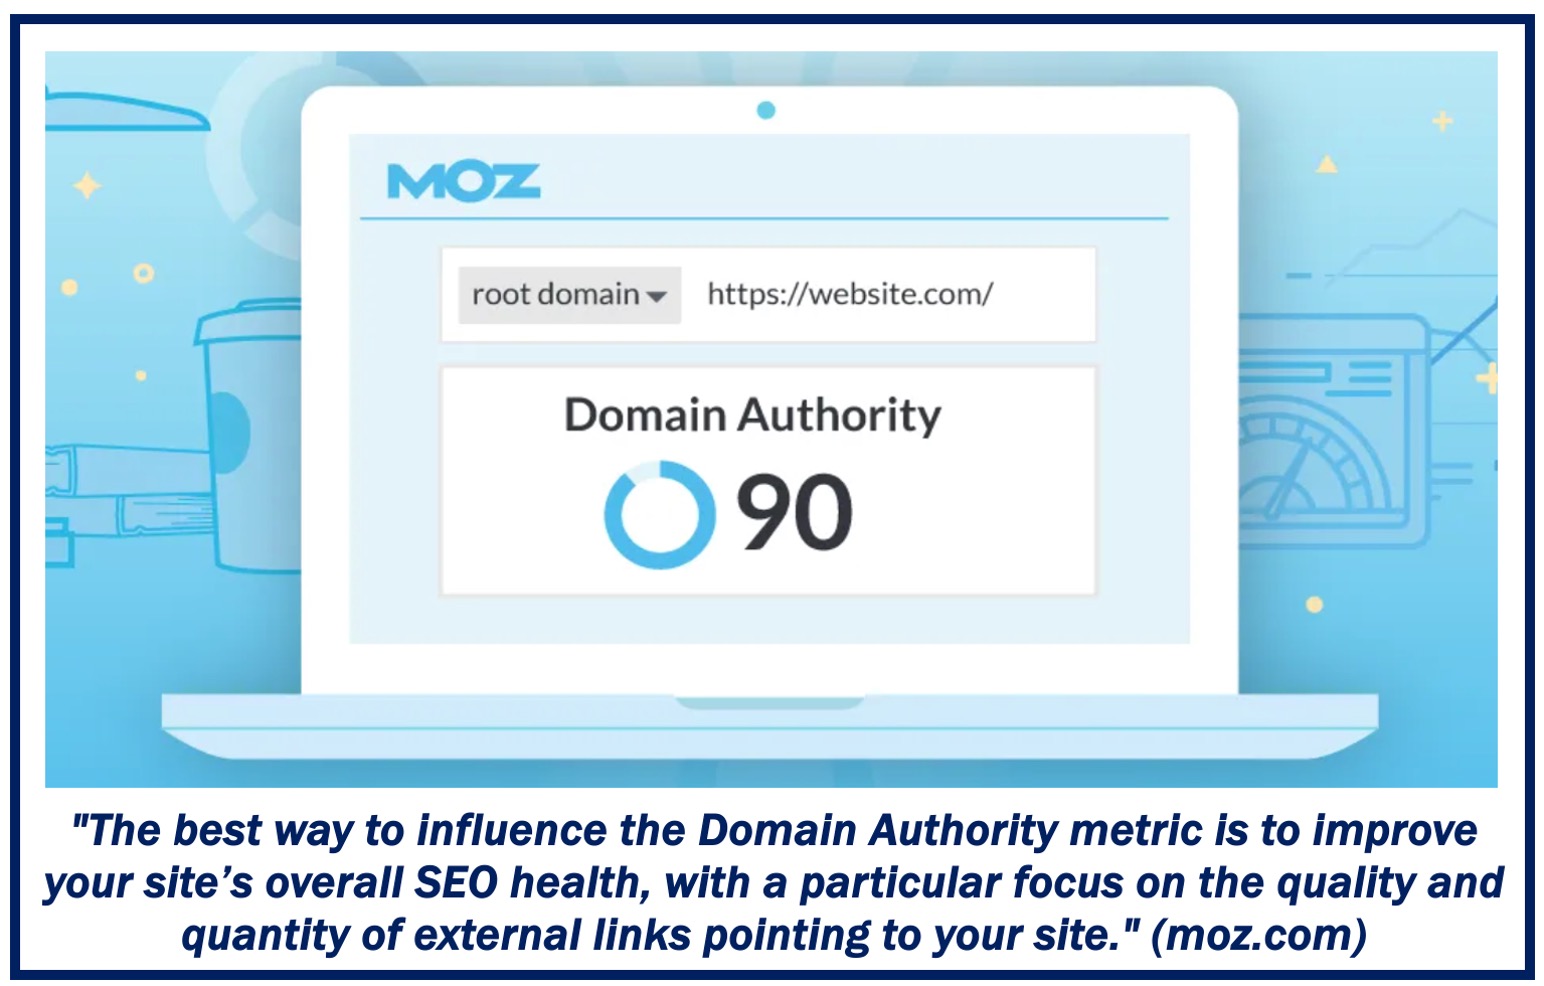 Image depicting domain authority and advice on how to improve it.